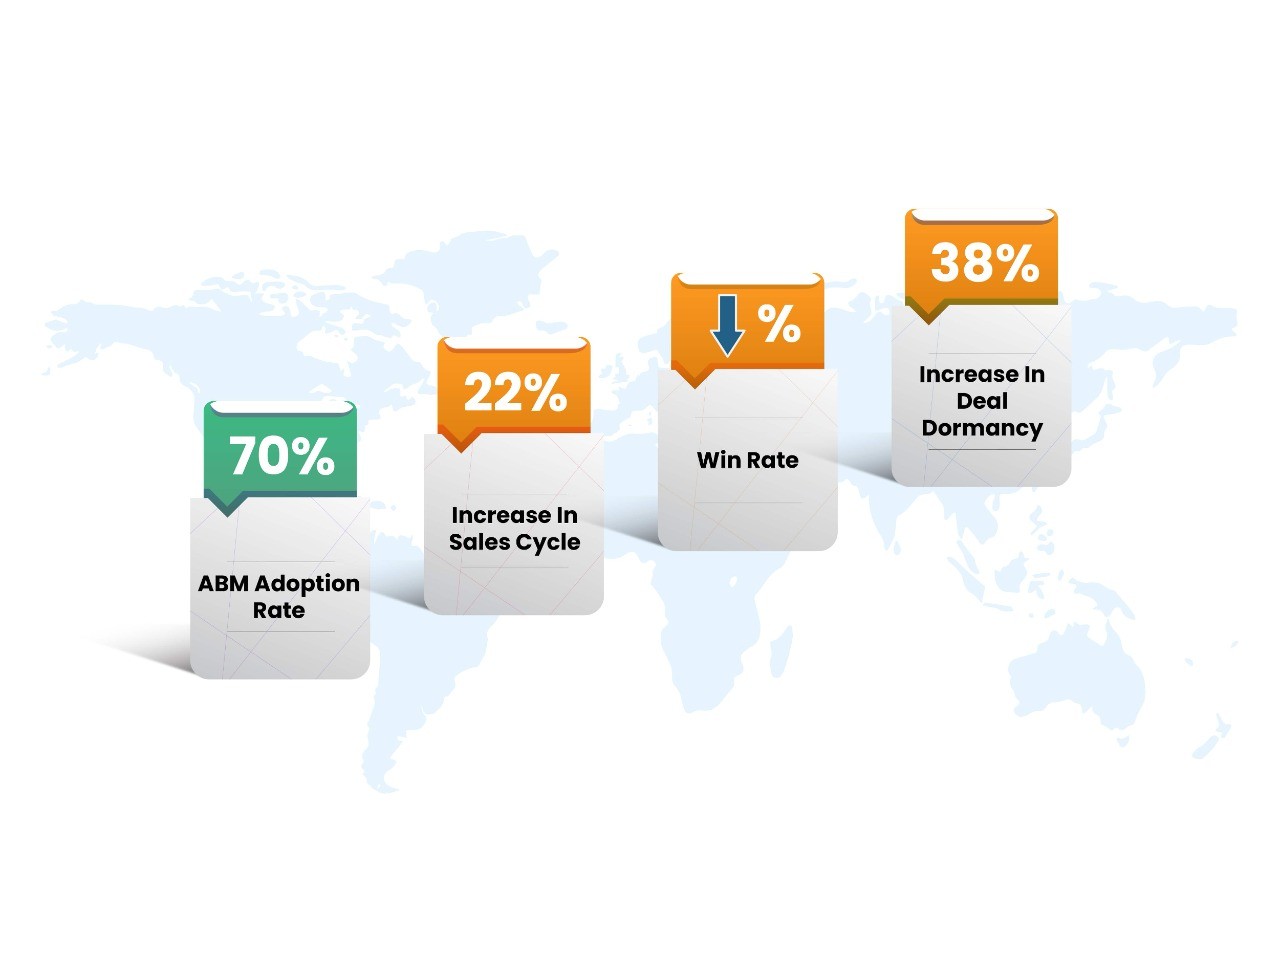 B2B marketing stats with respect to ABM across the world.
